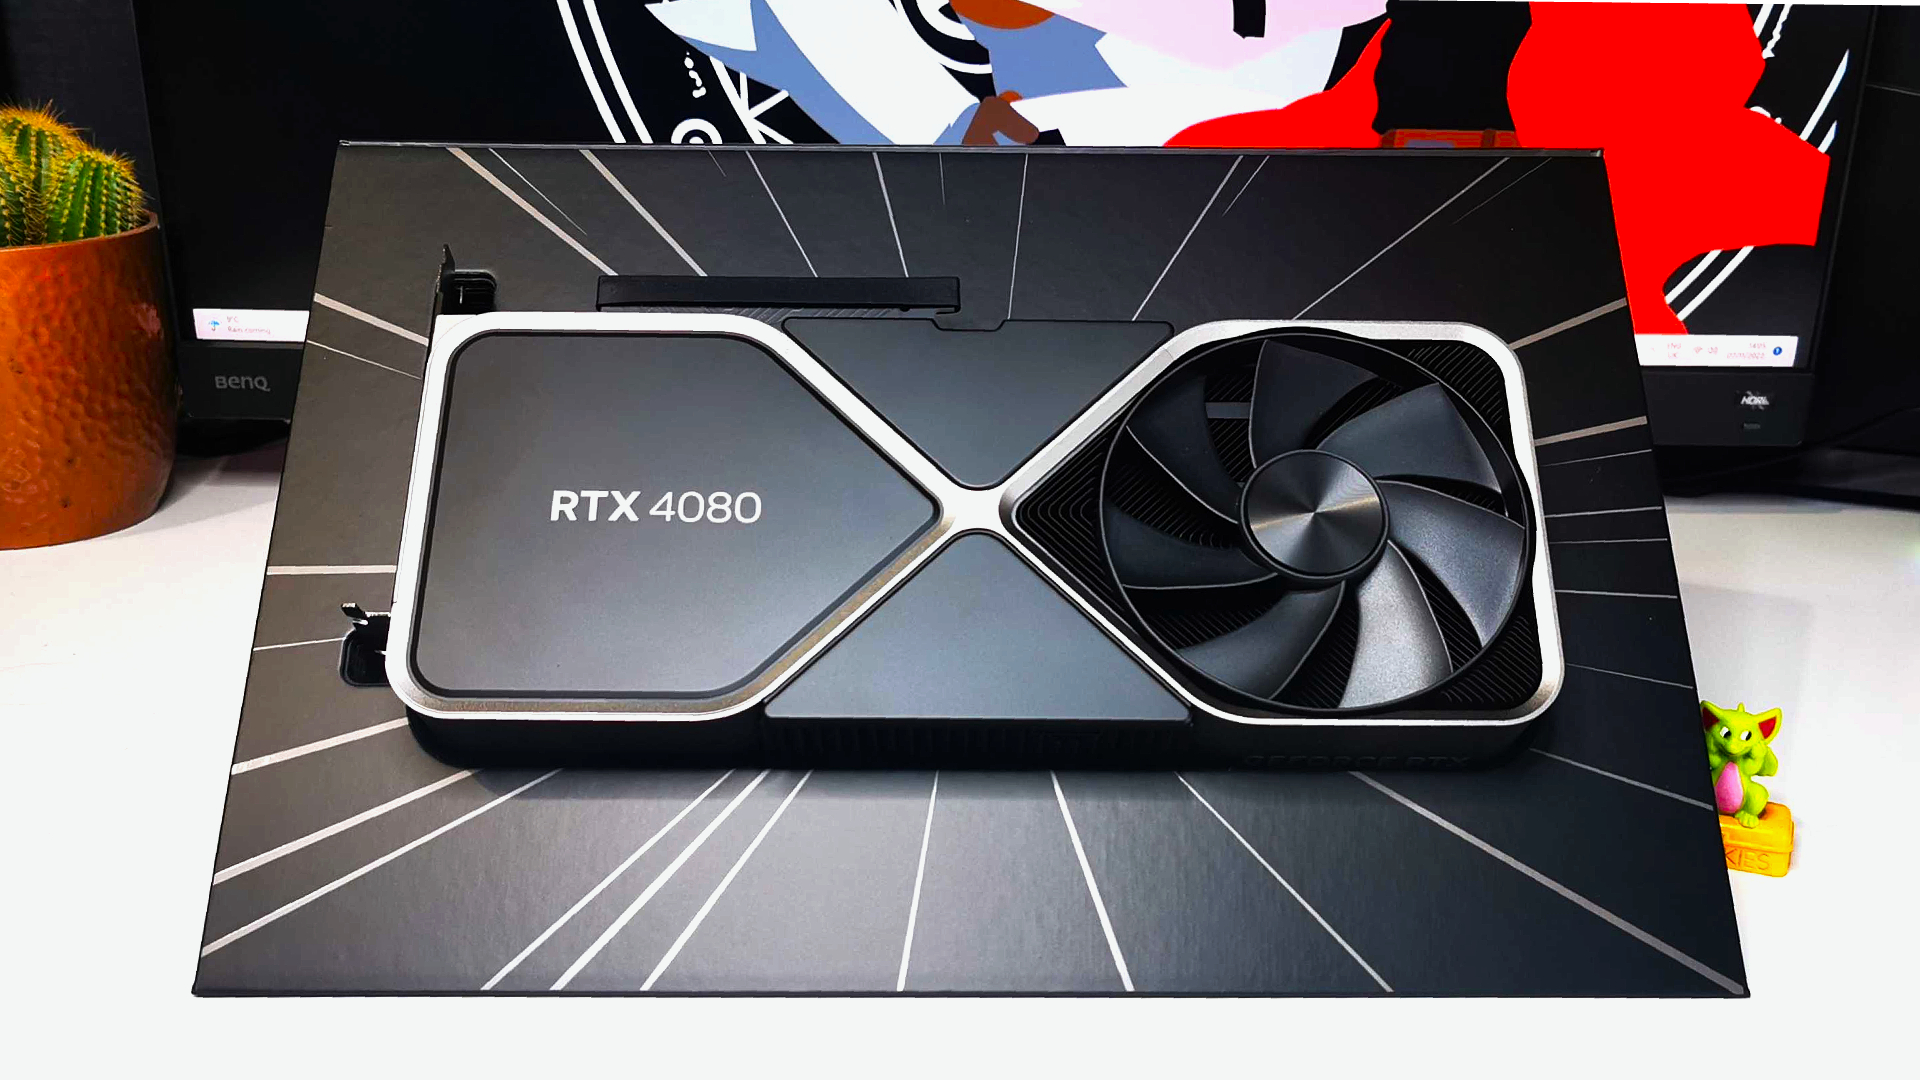 Nvidia GeForce RTX 4080 reviews – our roundup of the critics' scores